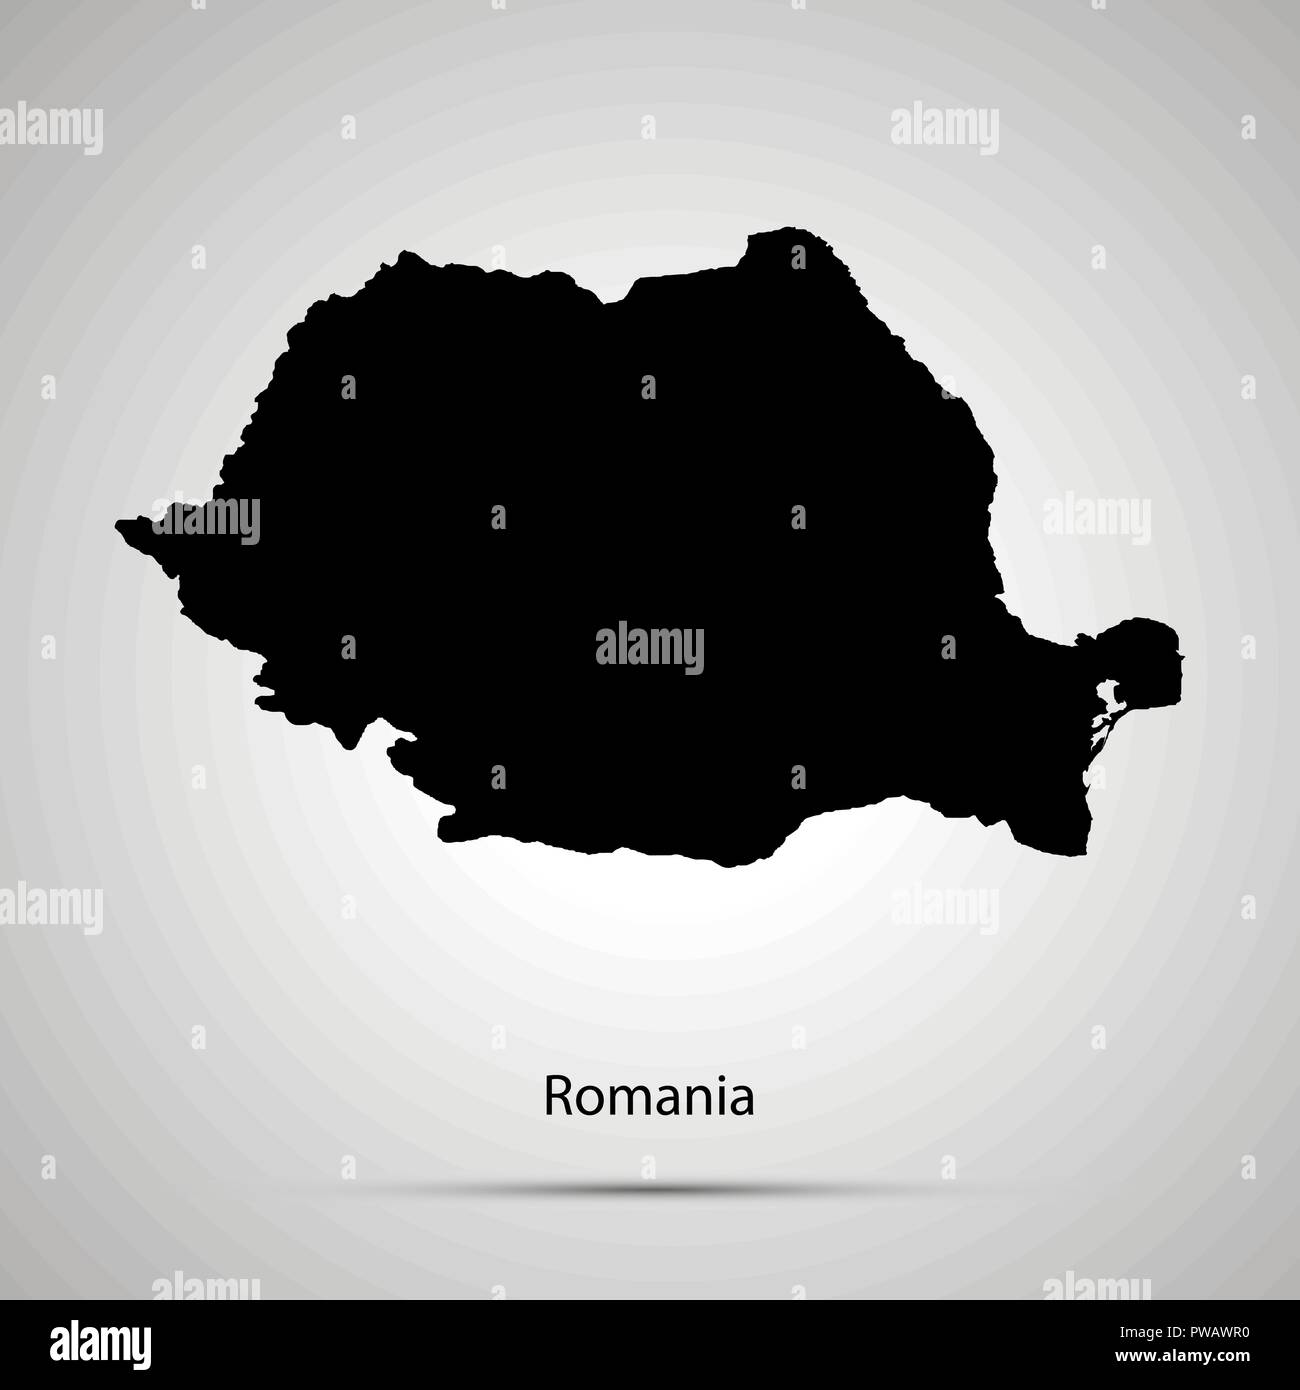 Romania country map, simple black silhouette Stock Vector